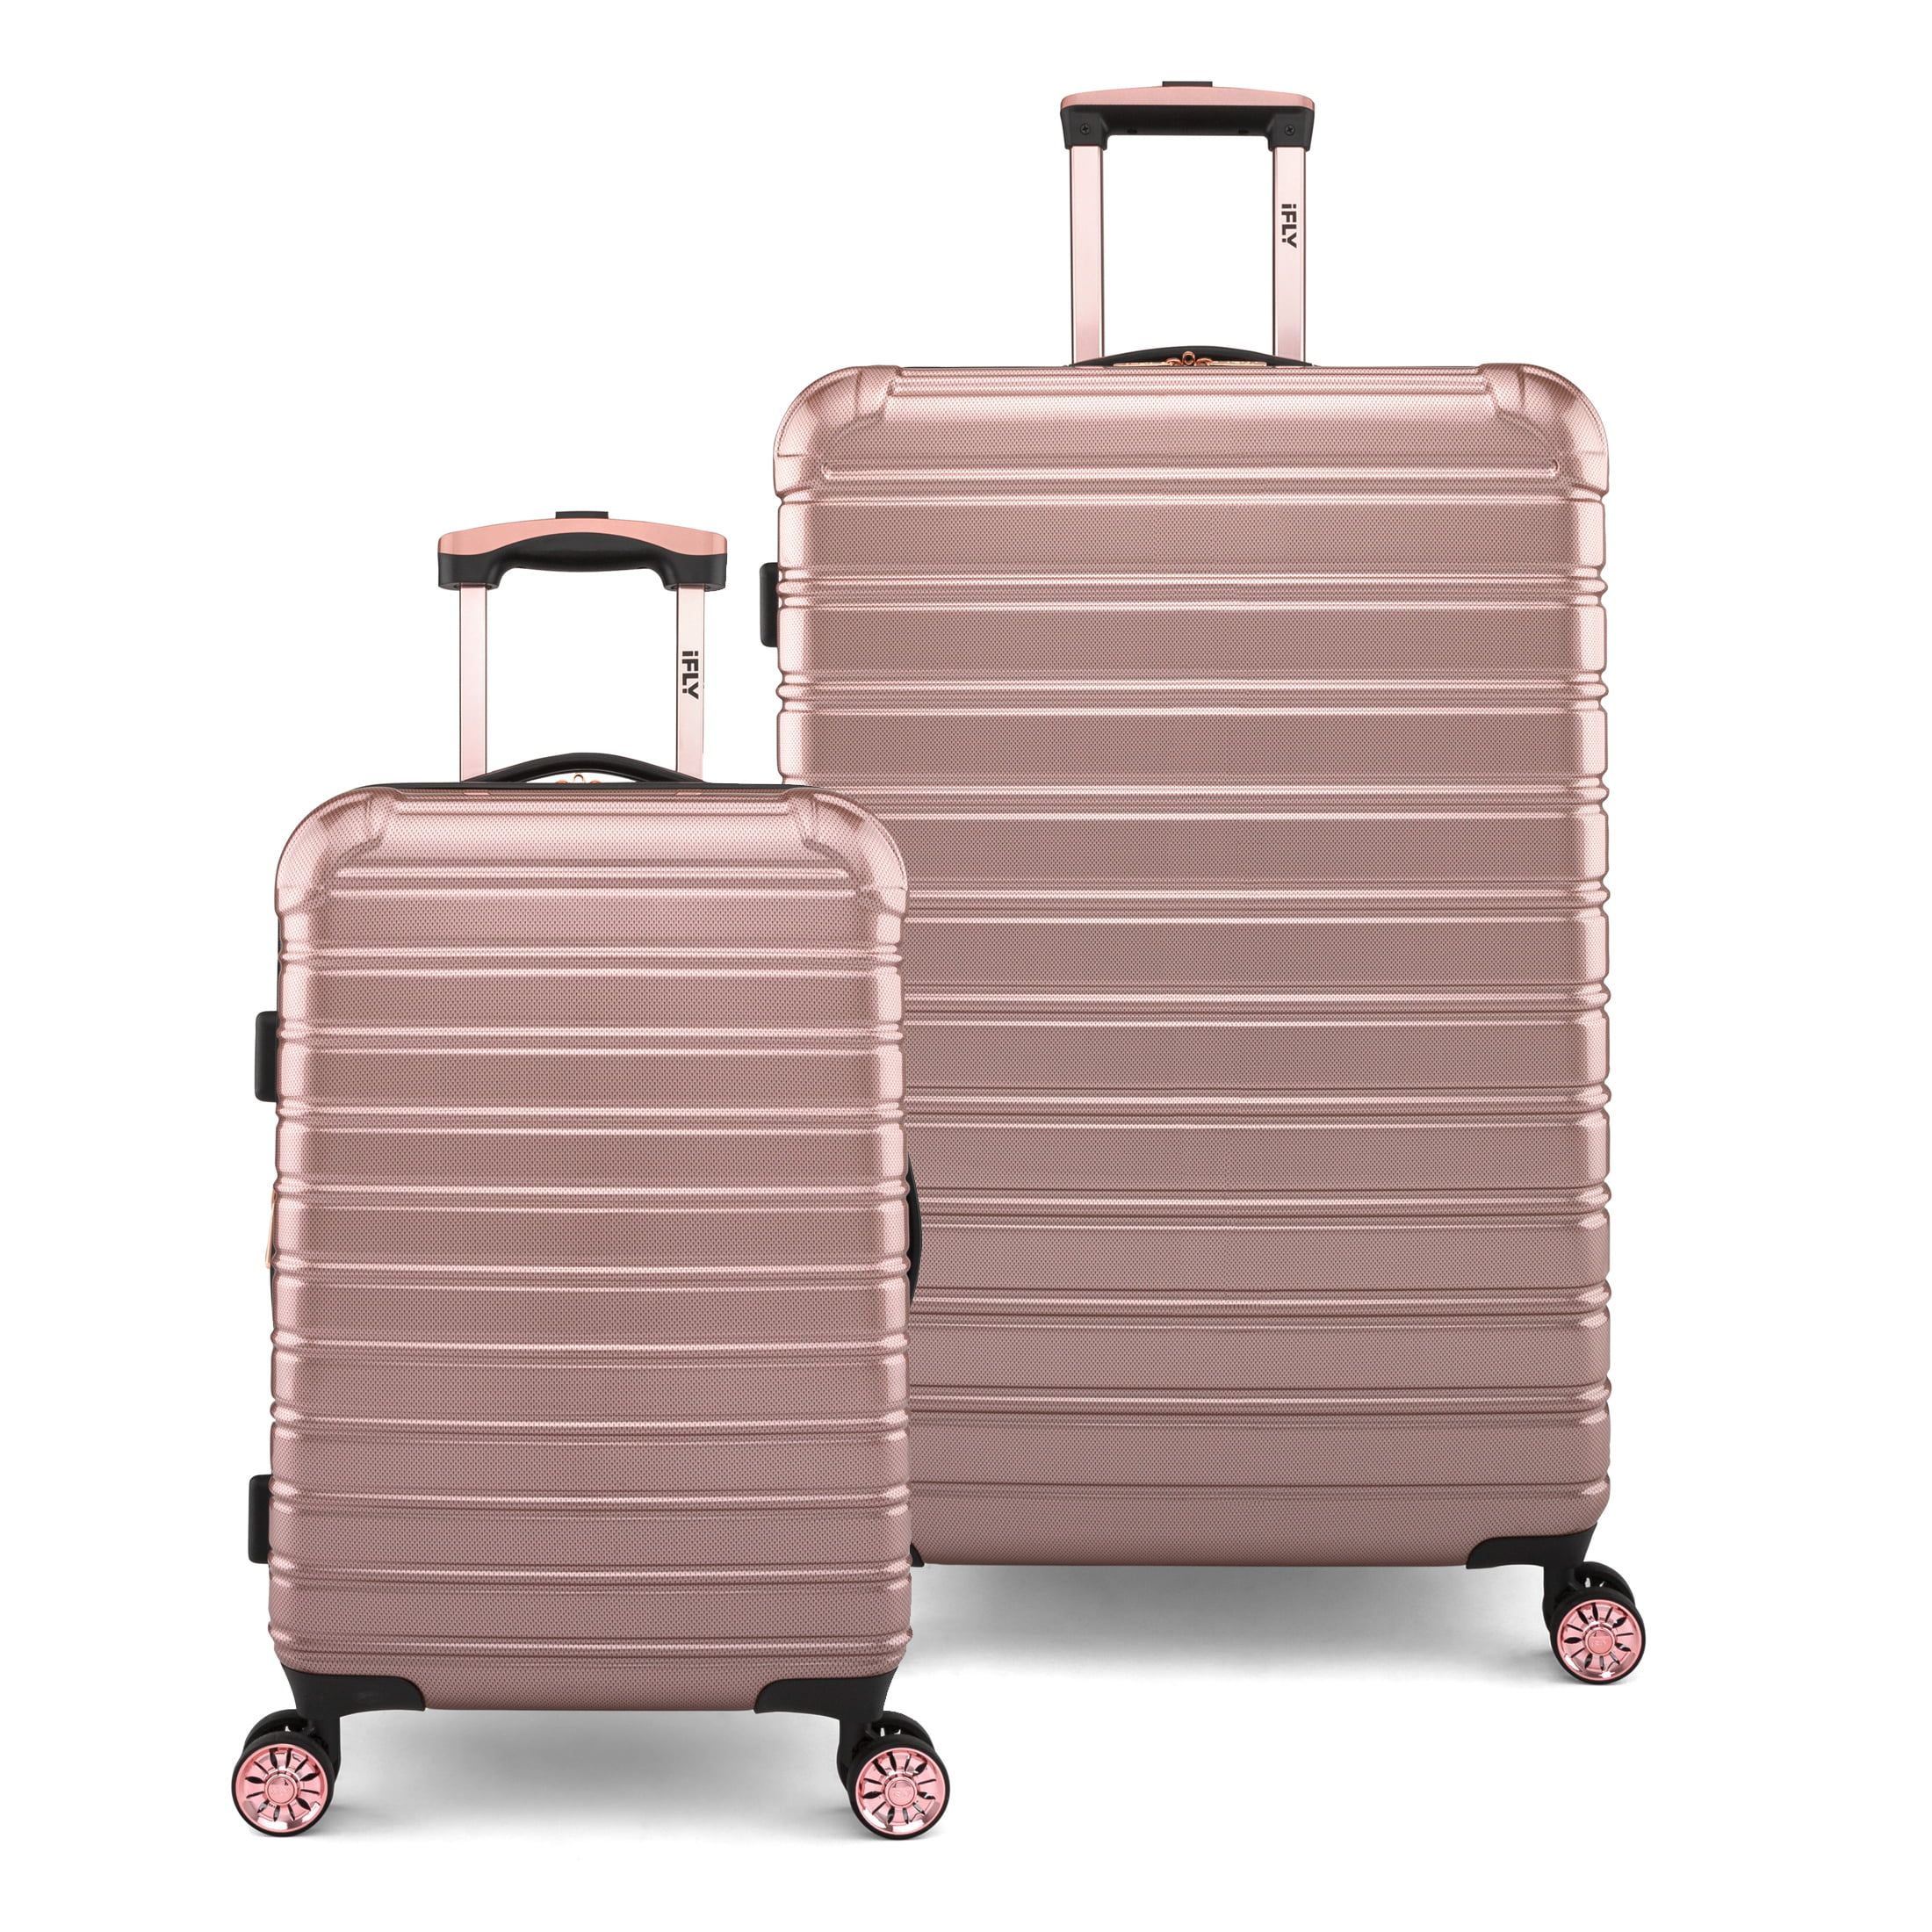 iFLY Hardside Luggage Fibertech 2 Piece Set, 20-inch Carry-on and 28-inch Checked Luggage, Rose G... | Walmart (US)